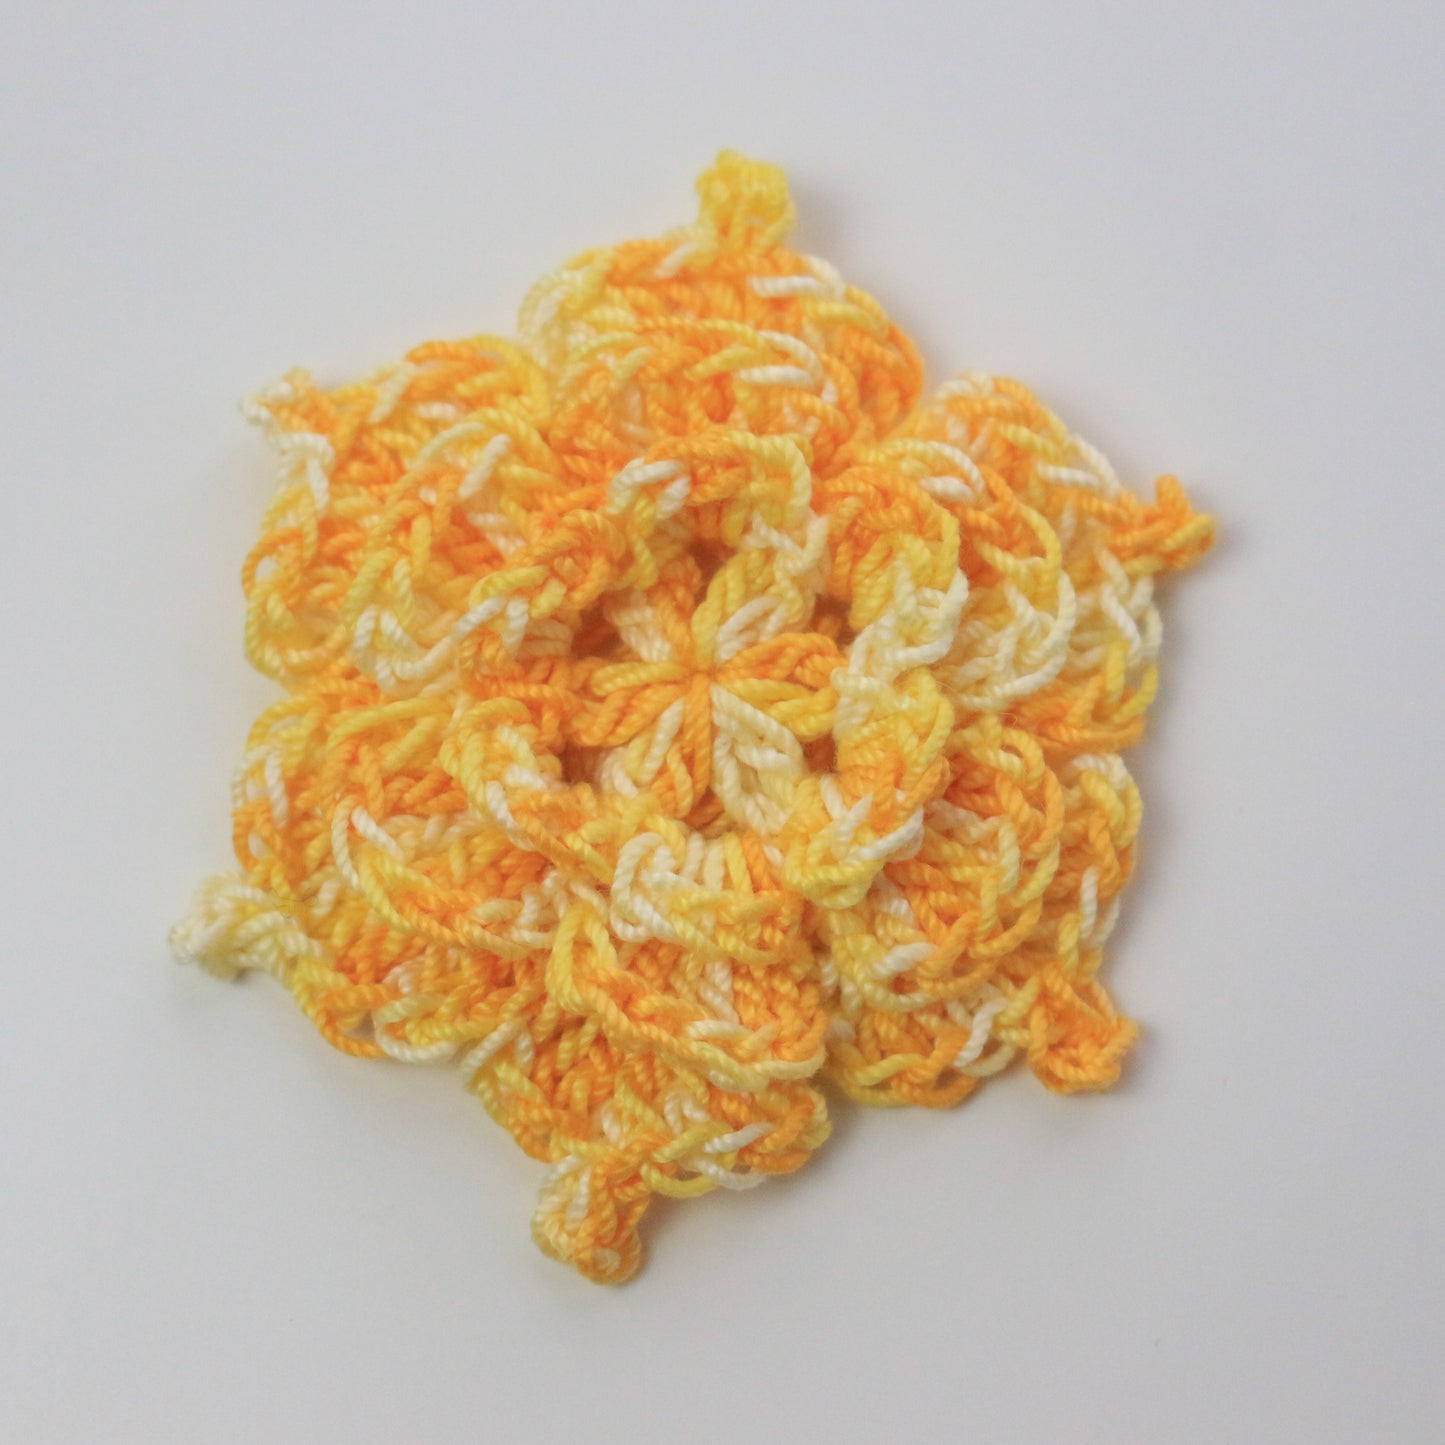 Flowers and Leaves Crochet Pattern - 3 flowers & 3 leaves, crochet flowers and leaves pattern, crochet flowers, crochet leaves